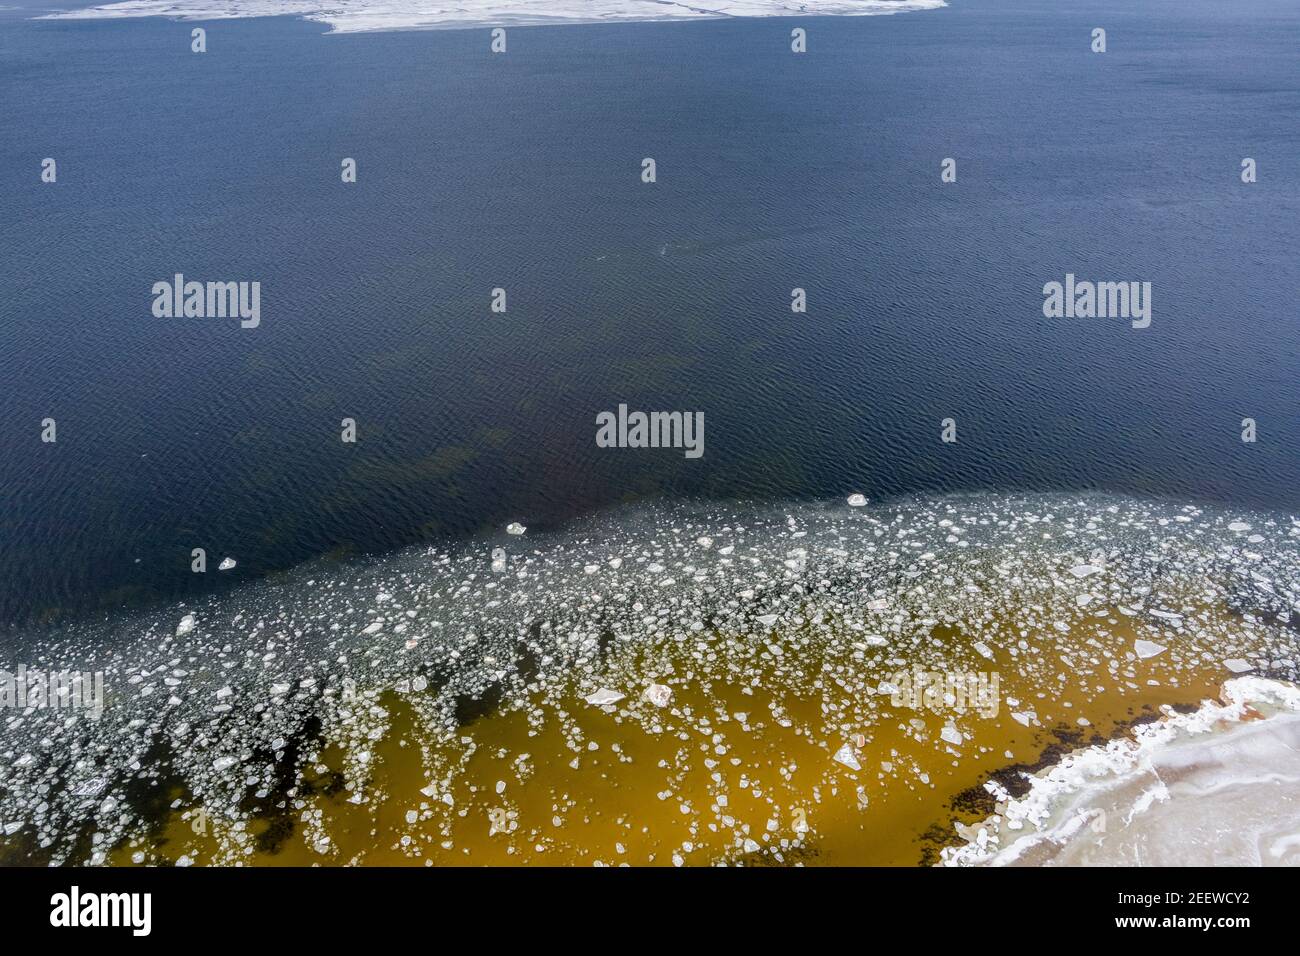 Ice blocks drifting around in a calm sea water creating interesting aerial patterns. Stock Photo